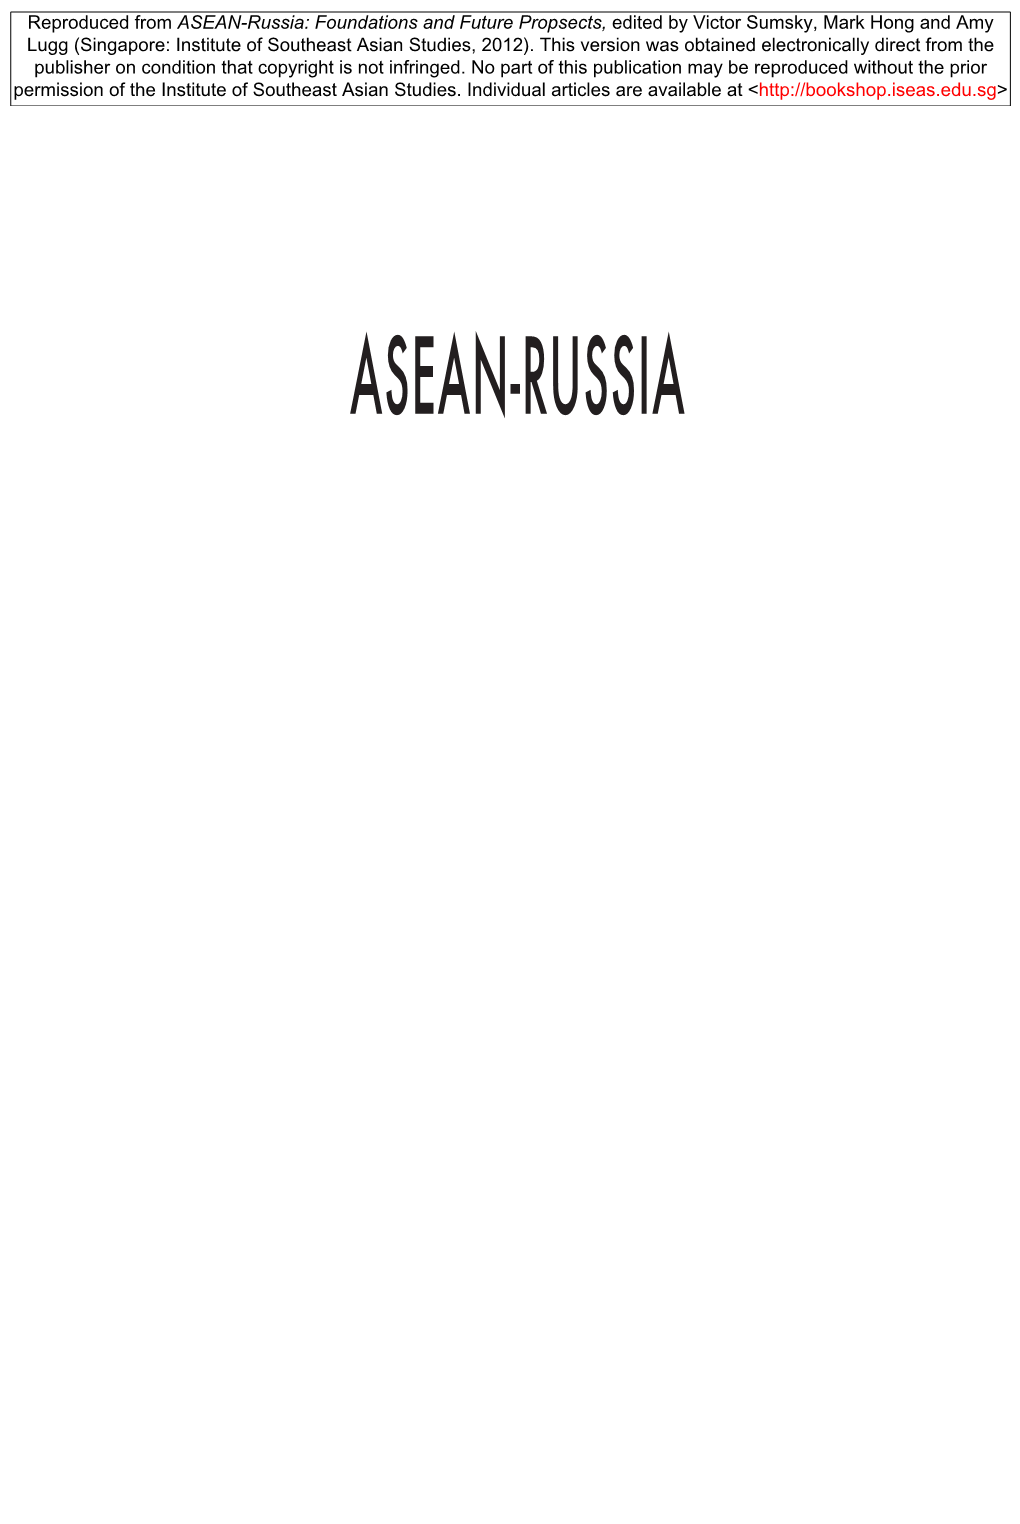 Reproduced from ASEAN-Russia